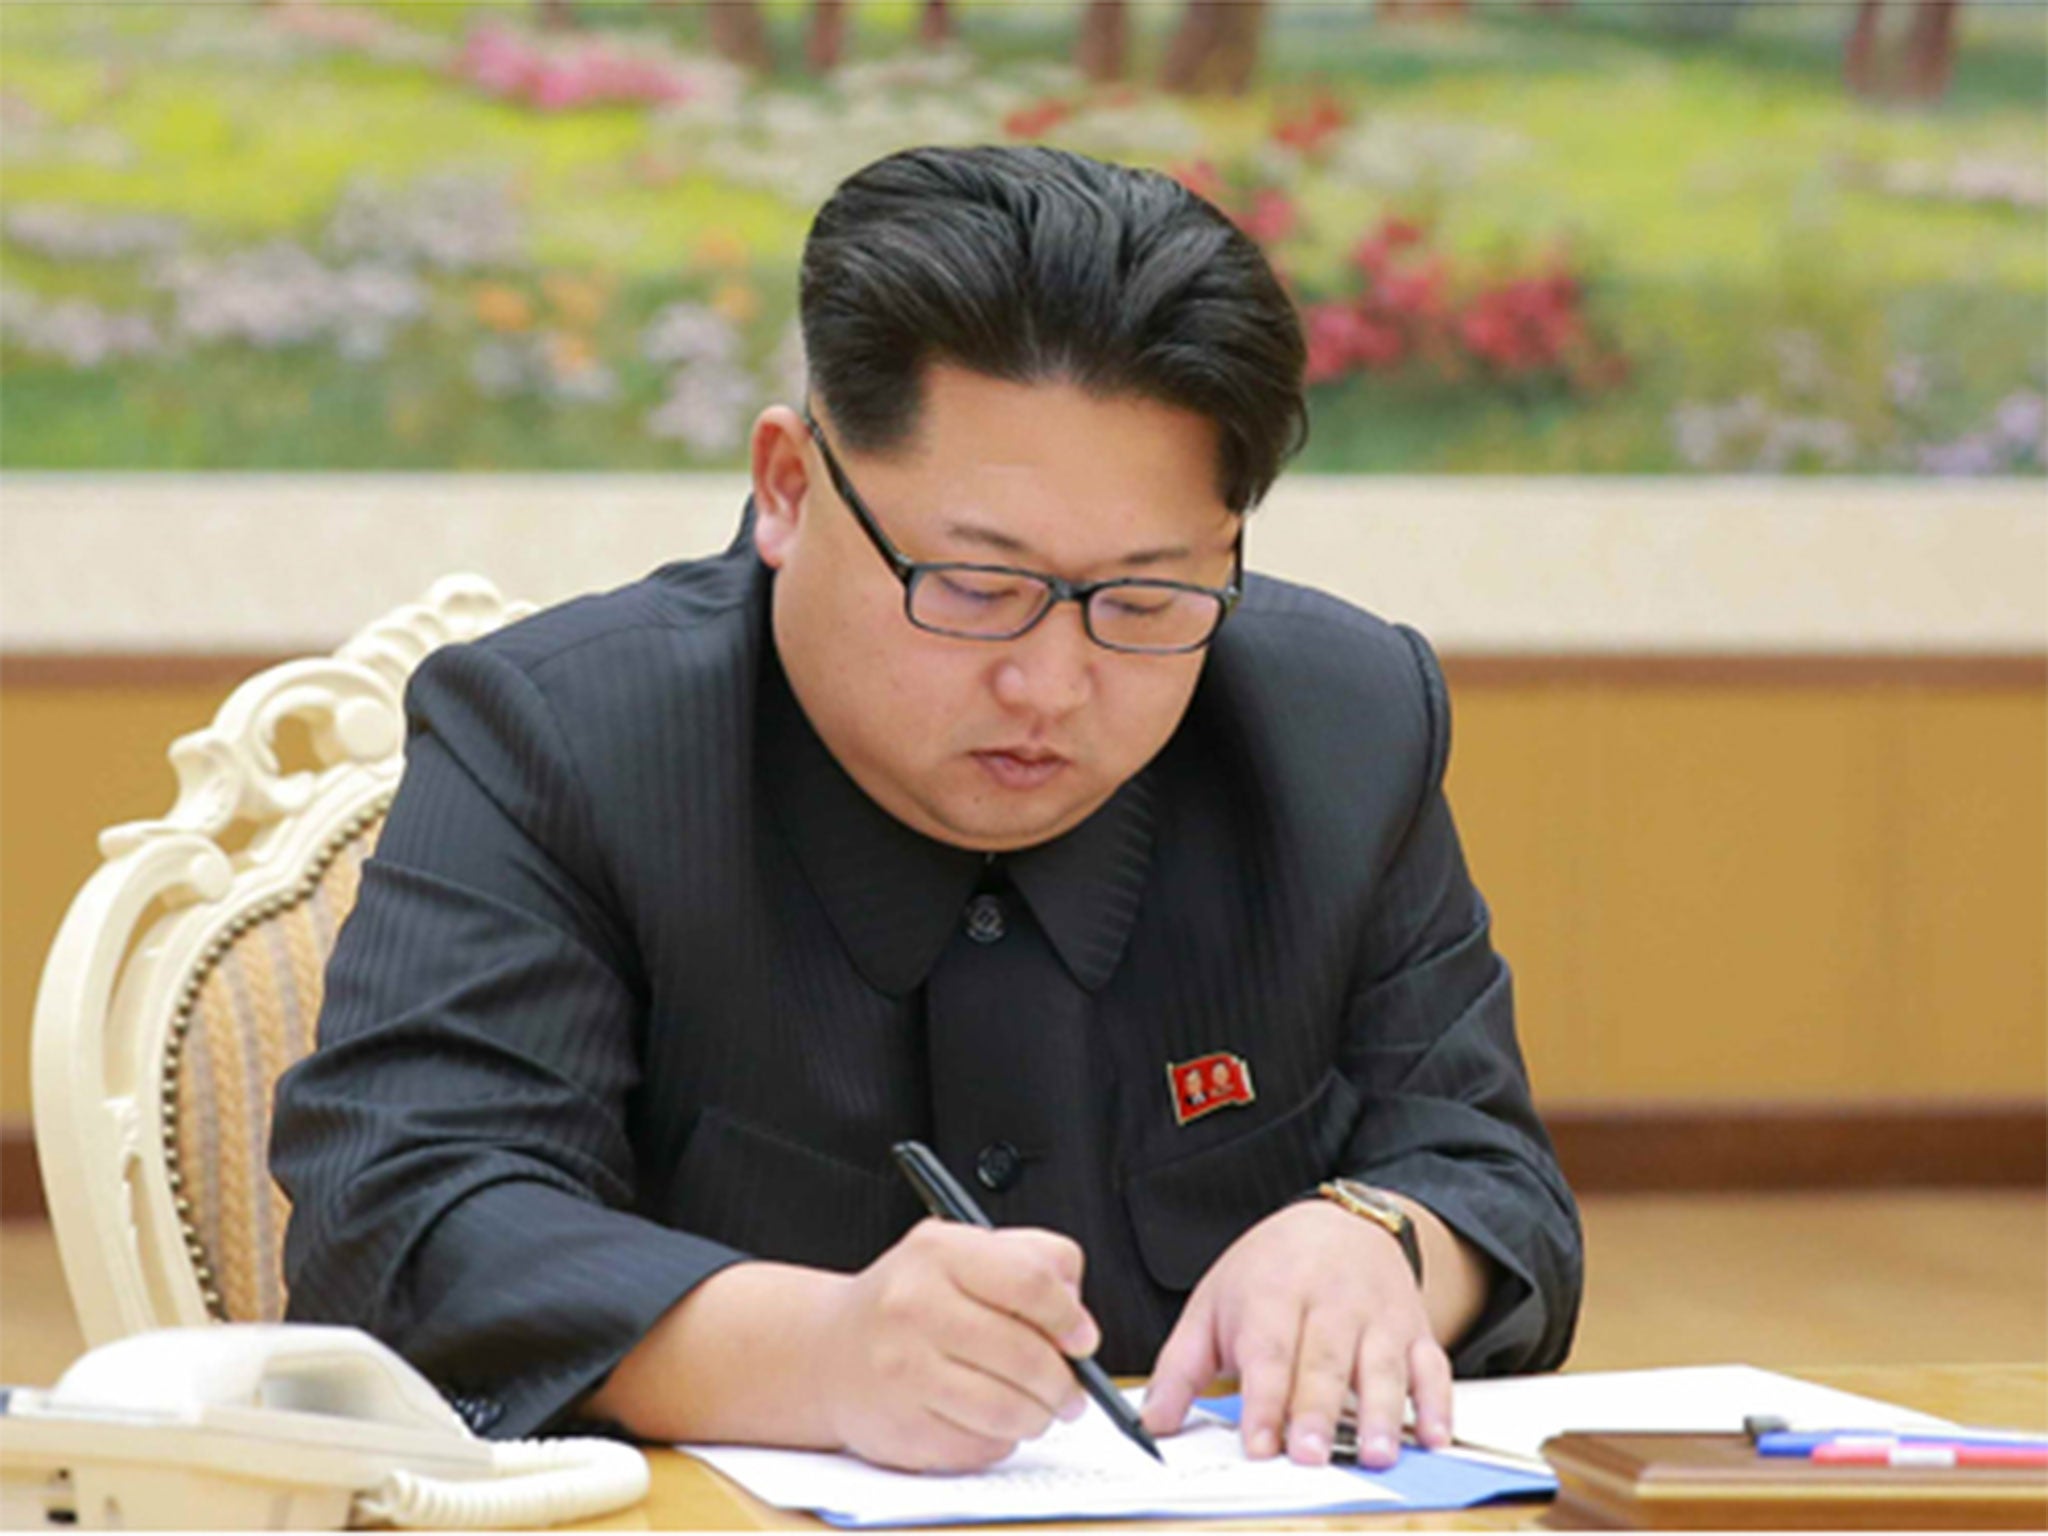 Picture issued by the North Korean government purporting to show Kim Jong-un ordering the H-bomb test